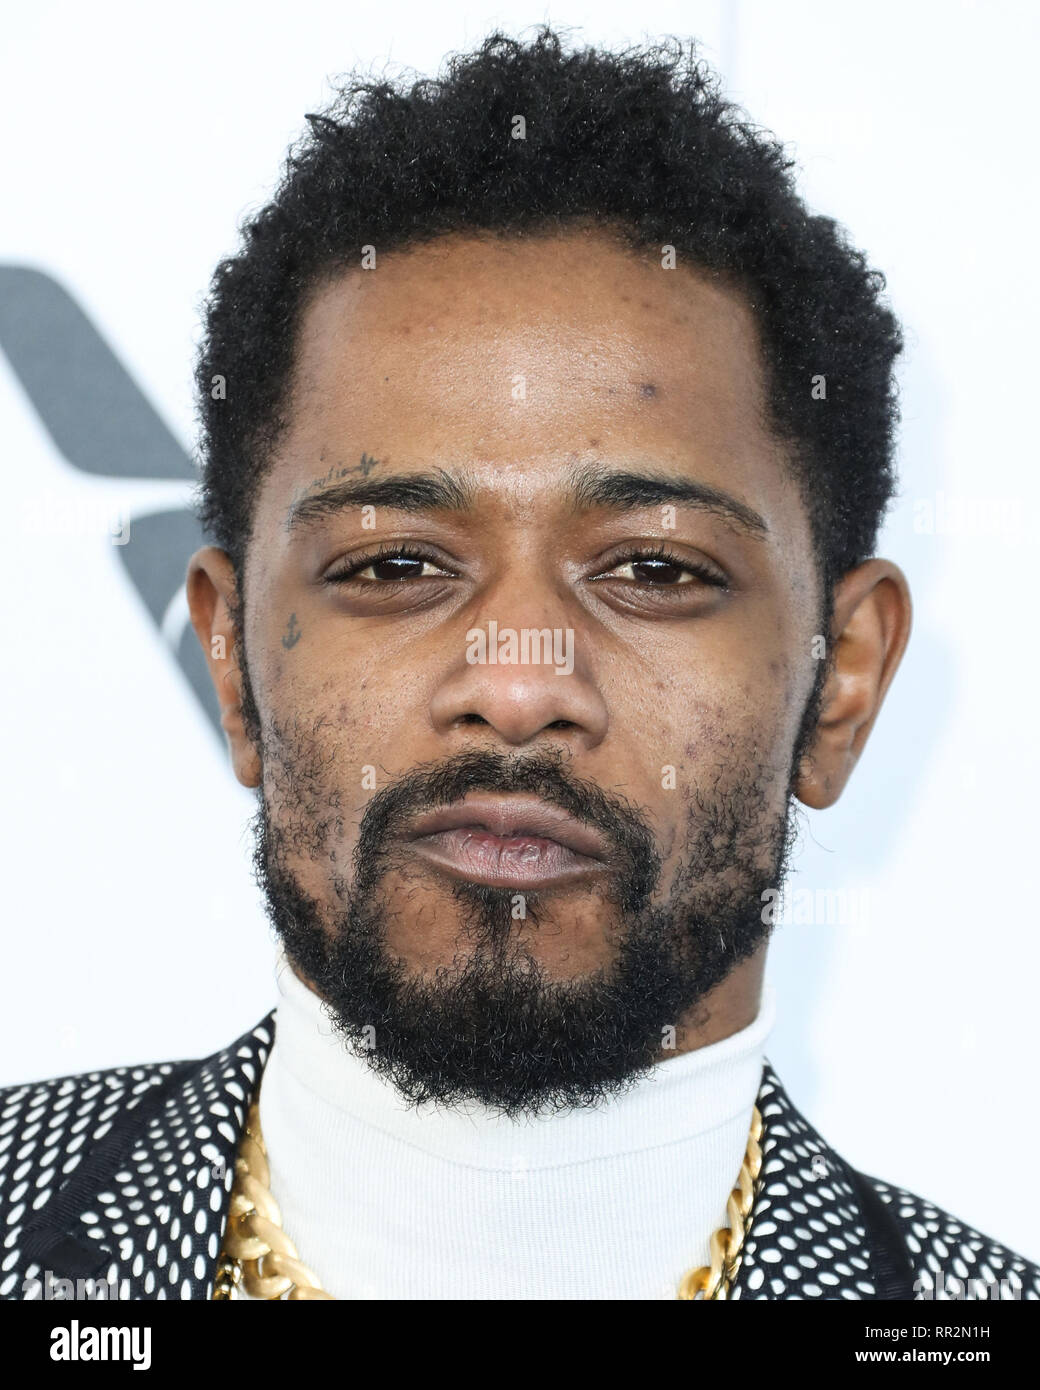 santa monica los angeles ca usa february 23 actor lakeith stanfield wearing karen walker eyewear sunglasses arrives at the 2019 film independent spirit awards held at the santa monica beach on february 23 2019 in santa monica los angeles california united states photo by xavier collinimage press agency RR2N1H